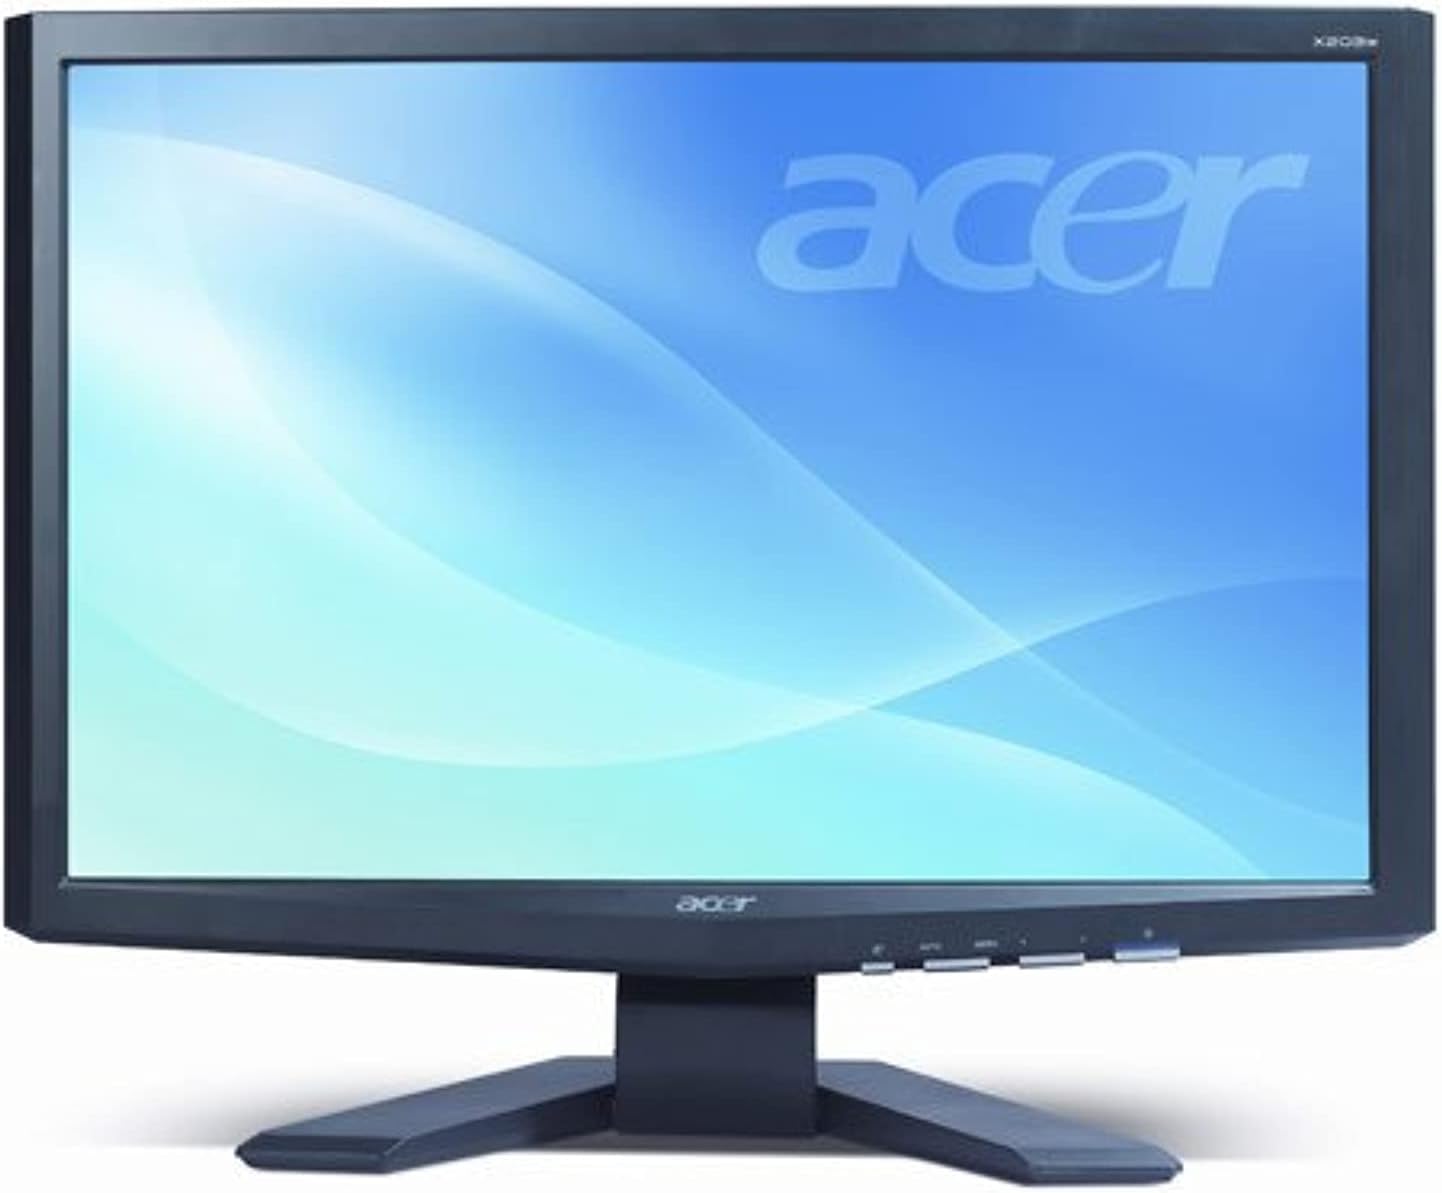 Acer LCD Monitor X203H 16:9 Occasionsartikel